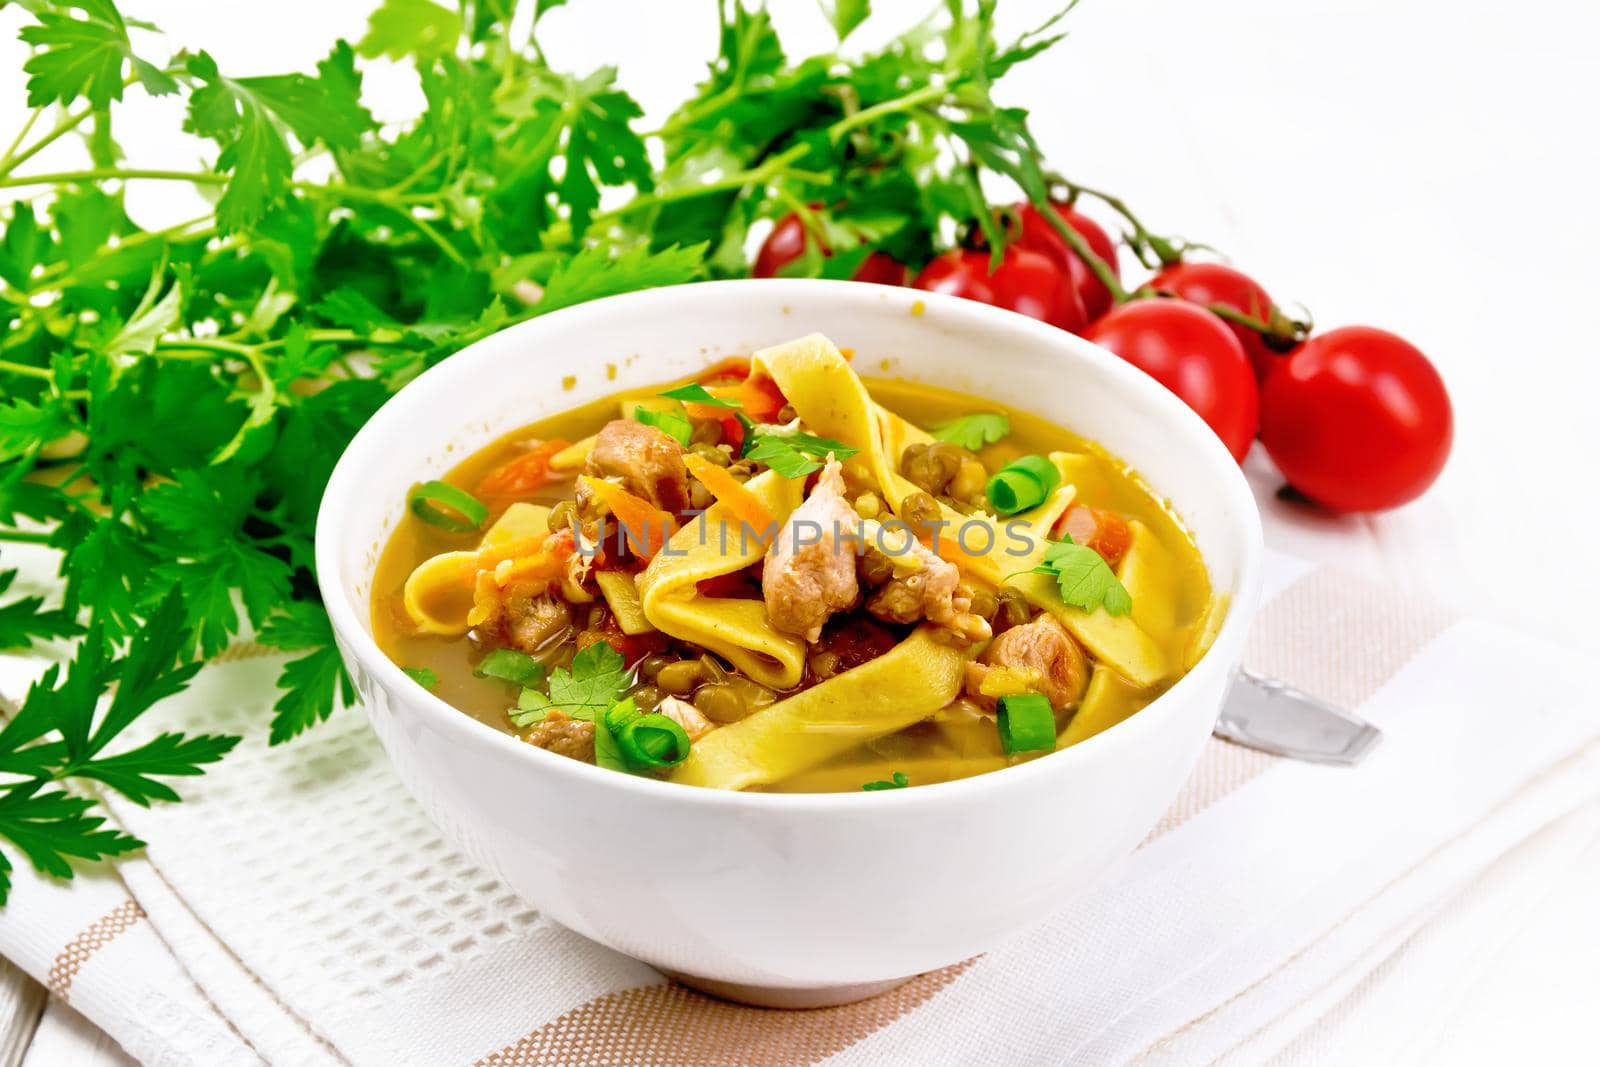 Soup with meat, tomatoes, vegetables, mung bean lentils and noodles in a bowl on a towel, parsley and spoon on wooden board background